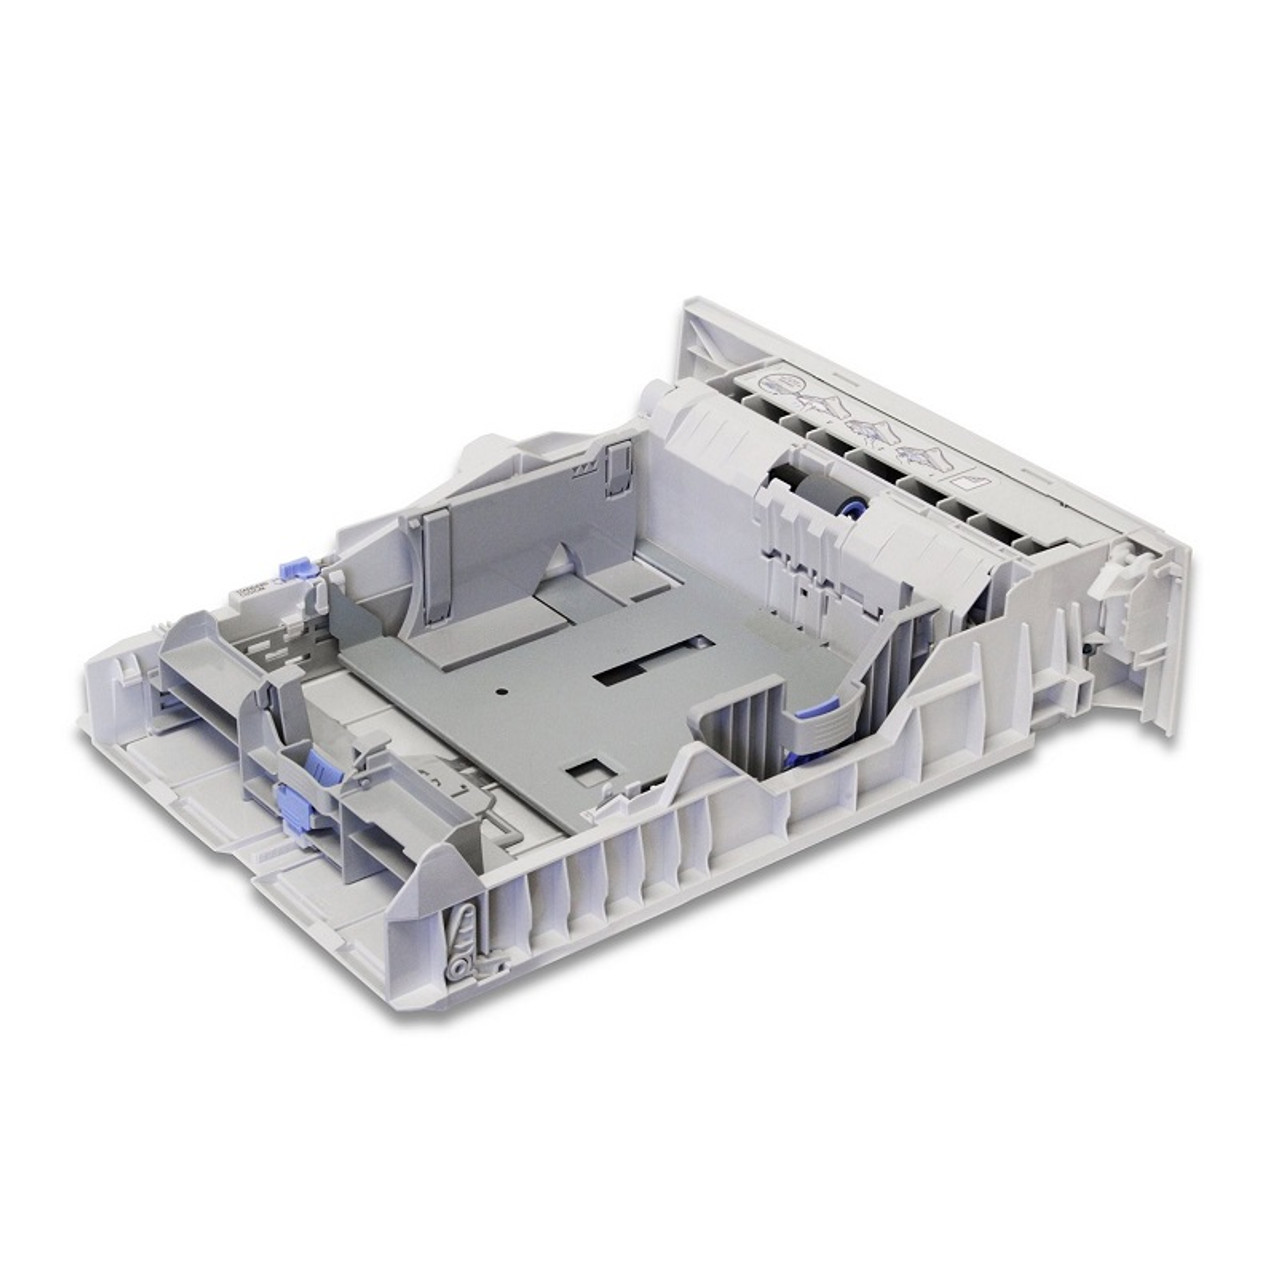 C7310-60015 - HP 250-Sheets Paper Input Tray for OfficeJet 7100 Series Printer (Refurbished / Grade-A)